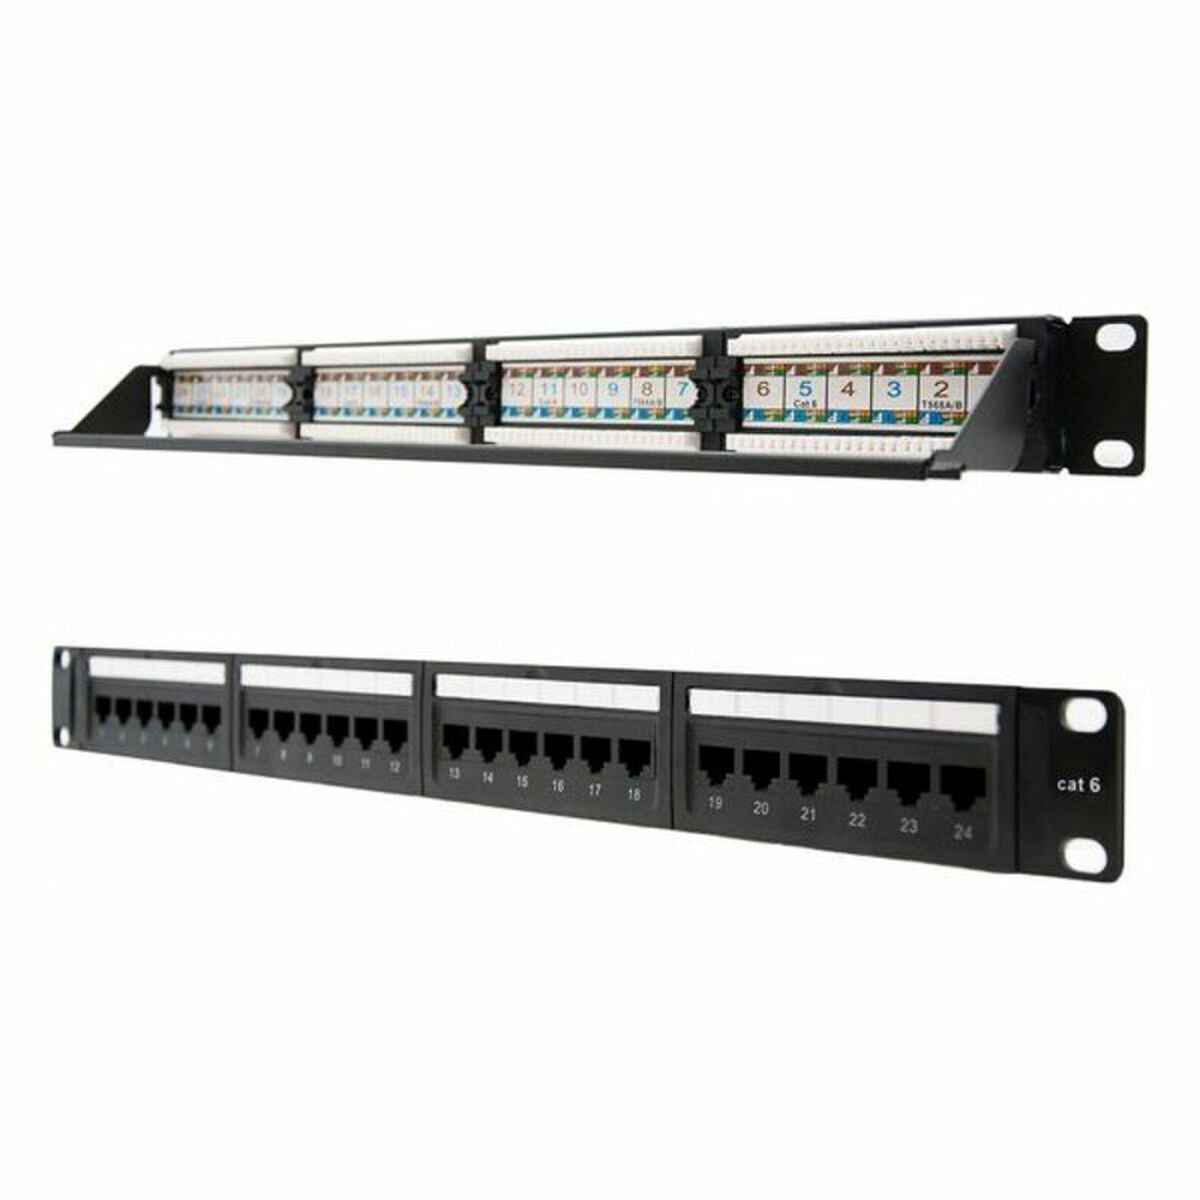 24-port UTP Category 6 Patch Panel NANOCABLE 10.21.3124 19" RJ45, NANOCABLE, Computing, Accessories, 24-port-utp-category-6-patch-panel-nanocable-10-21-3124-19-rj45, Brand_NANOCABLE, category-reference-2609, category-reference-2803, category-reference-2828, category-reference-t-19685, category-reference-t-19908, Condition_NEW, furniture, networks/wiring, organisation, Price_20 - 50, Teleworking, RiotNook